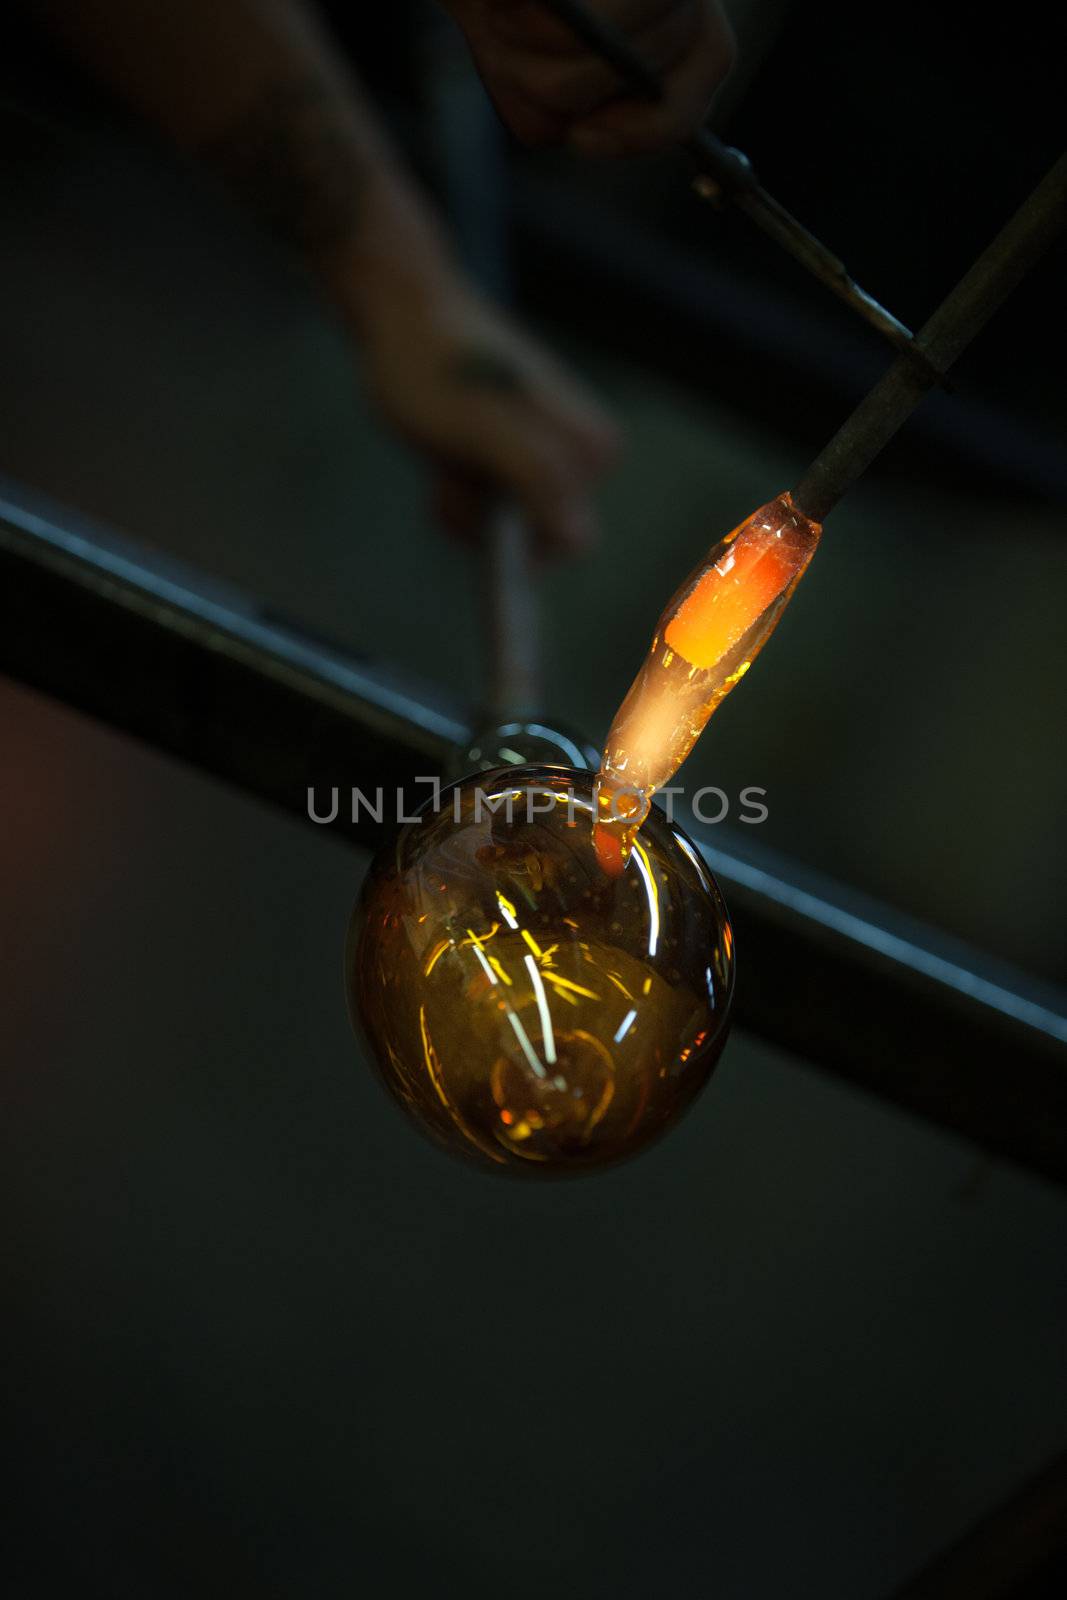 Close up of flame from blowtorch heating up glass art object